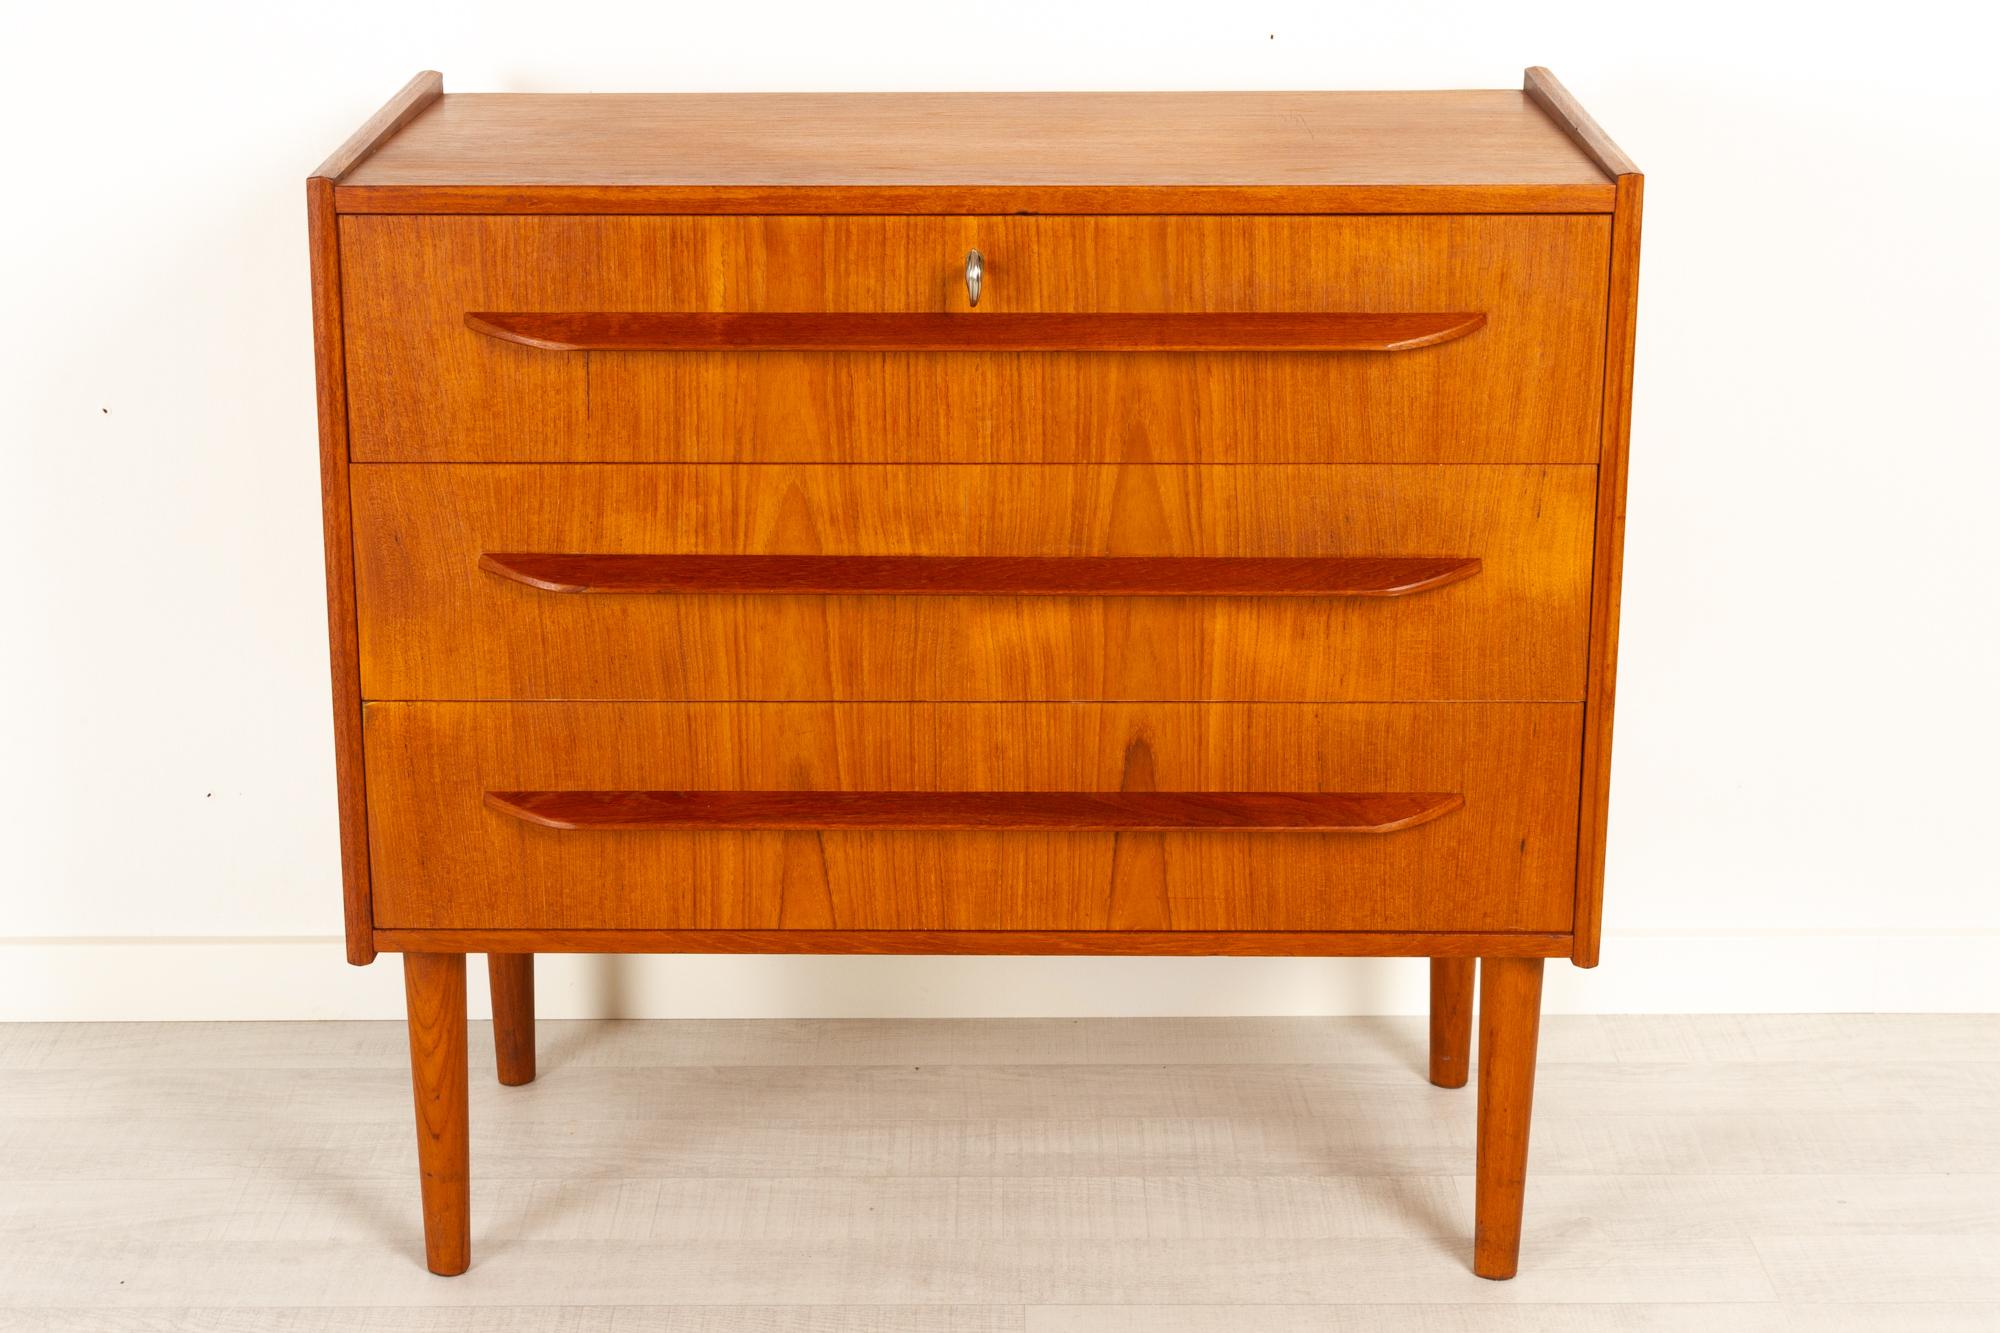 Danish teak chest of drawers 1960s
Danish modern 3-drawer dresser on round tapered legs.
Three wide drawers with dovetail joints. Pulls in solid teak. Top drawer with lock and key.
Very good condition. Only few signs of use. One drawer corner has